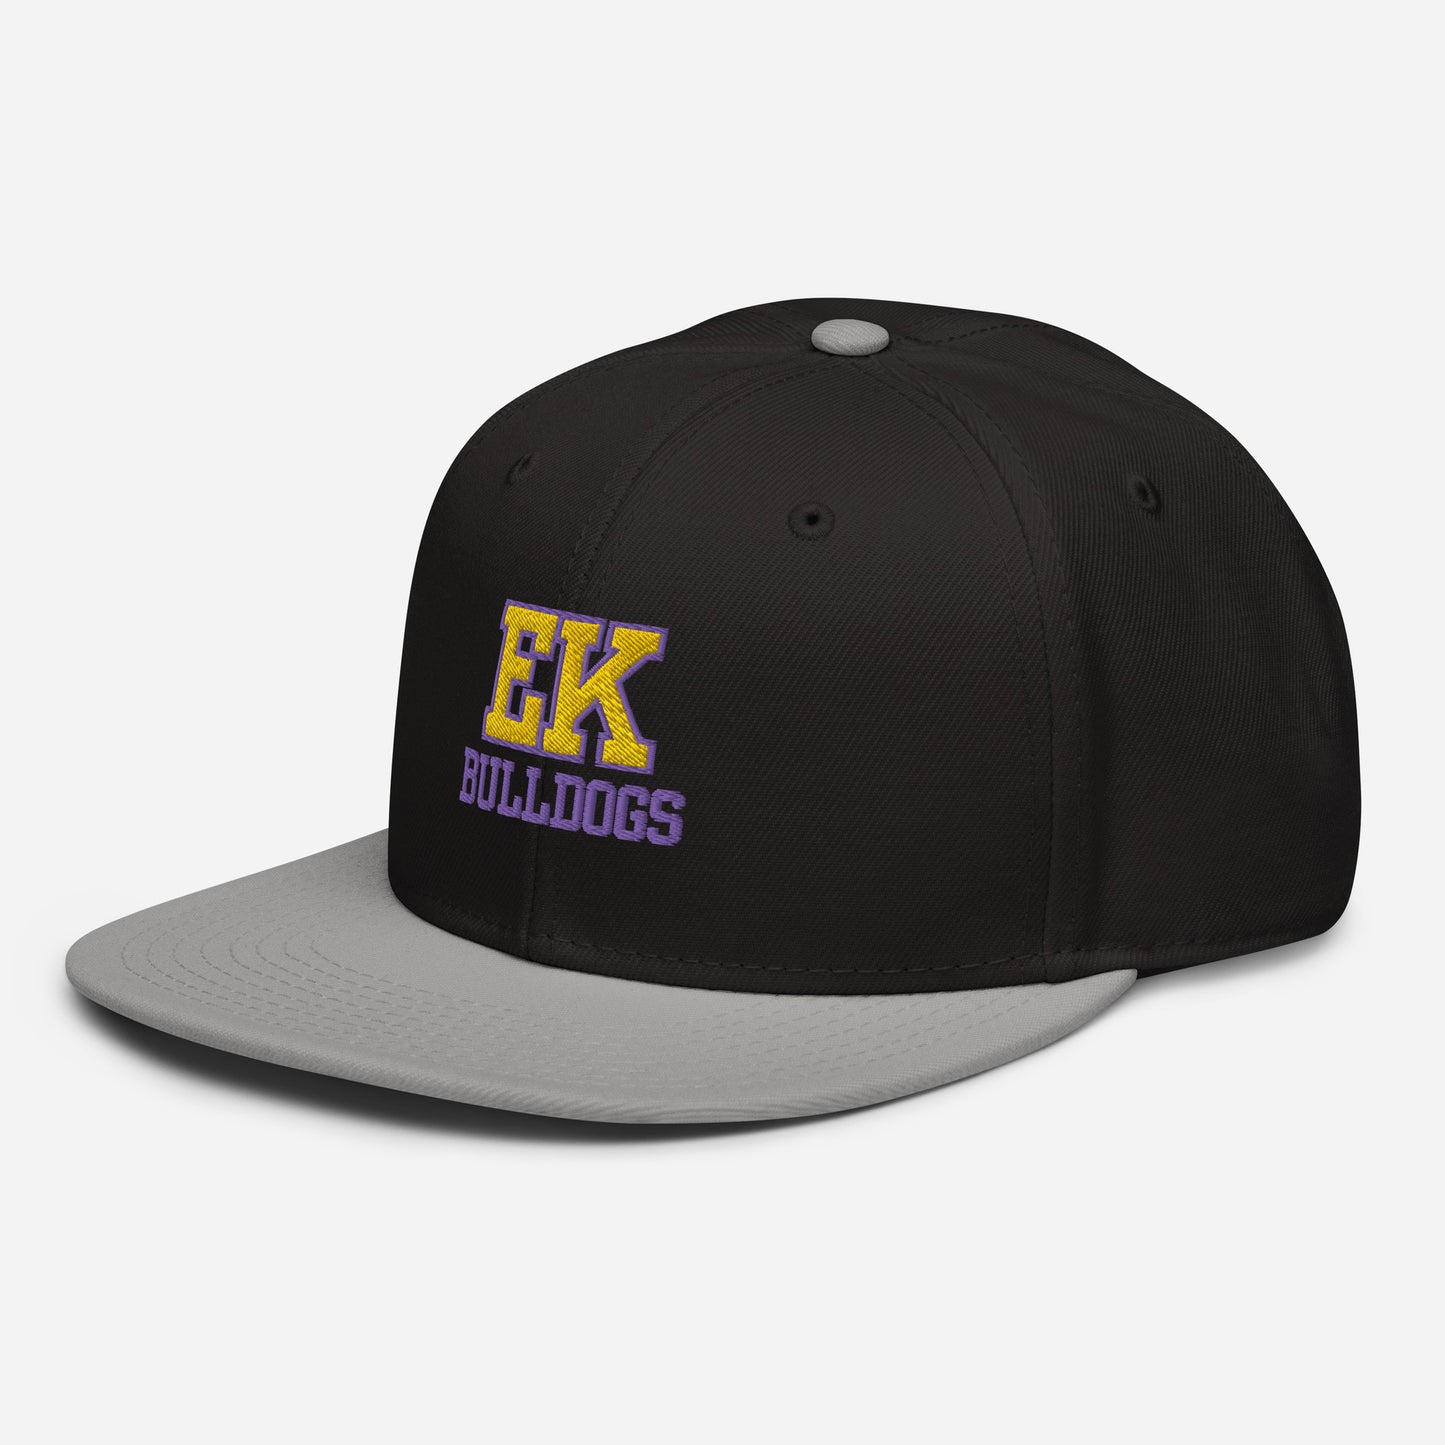 East Knox Bulldogs Embroidered Snapback Hat